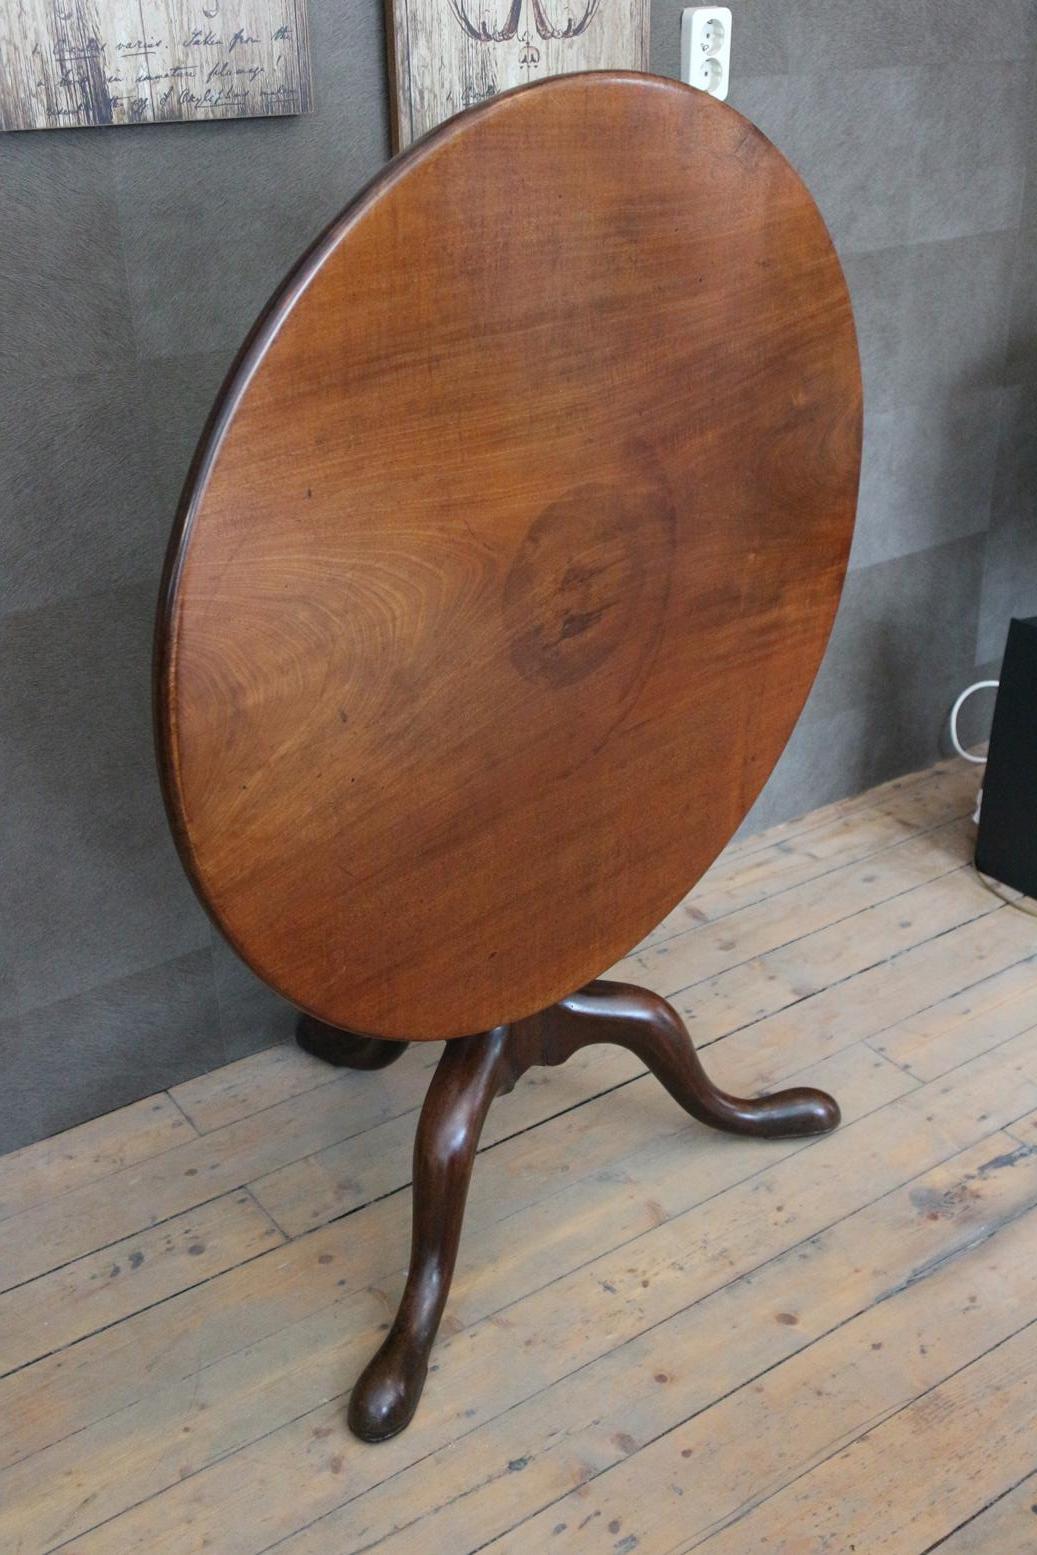 Antique (18th century) mahogany tilt-top table in good condition. Beautiful sturdy base. This type of leg is called gun barrel. The table has been shortened, the original height has been approximately 72 cm
Origin: England
Period: circa